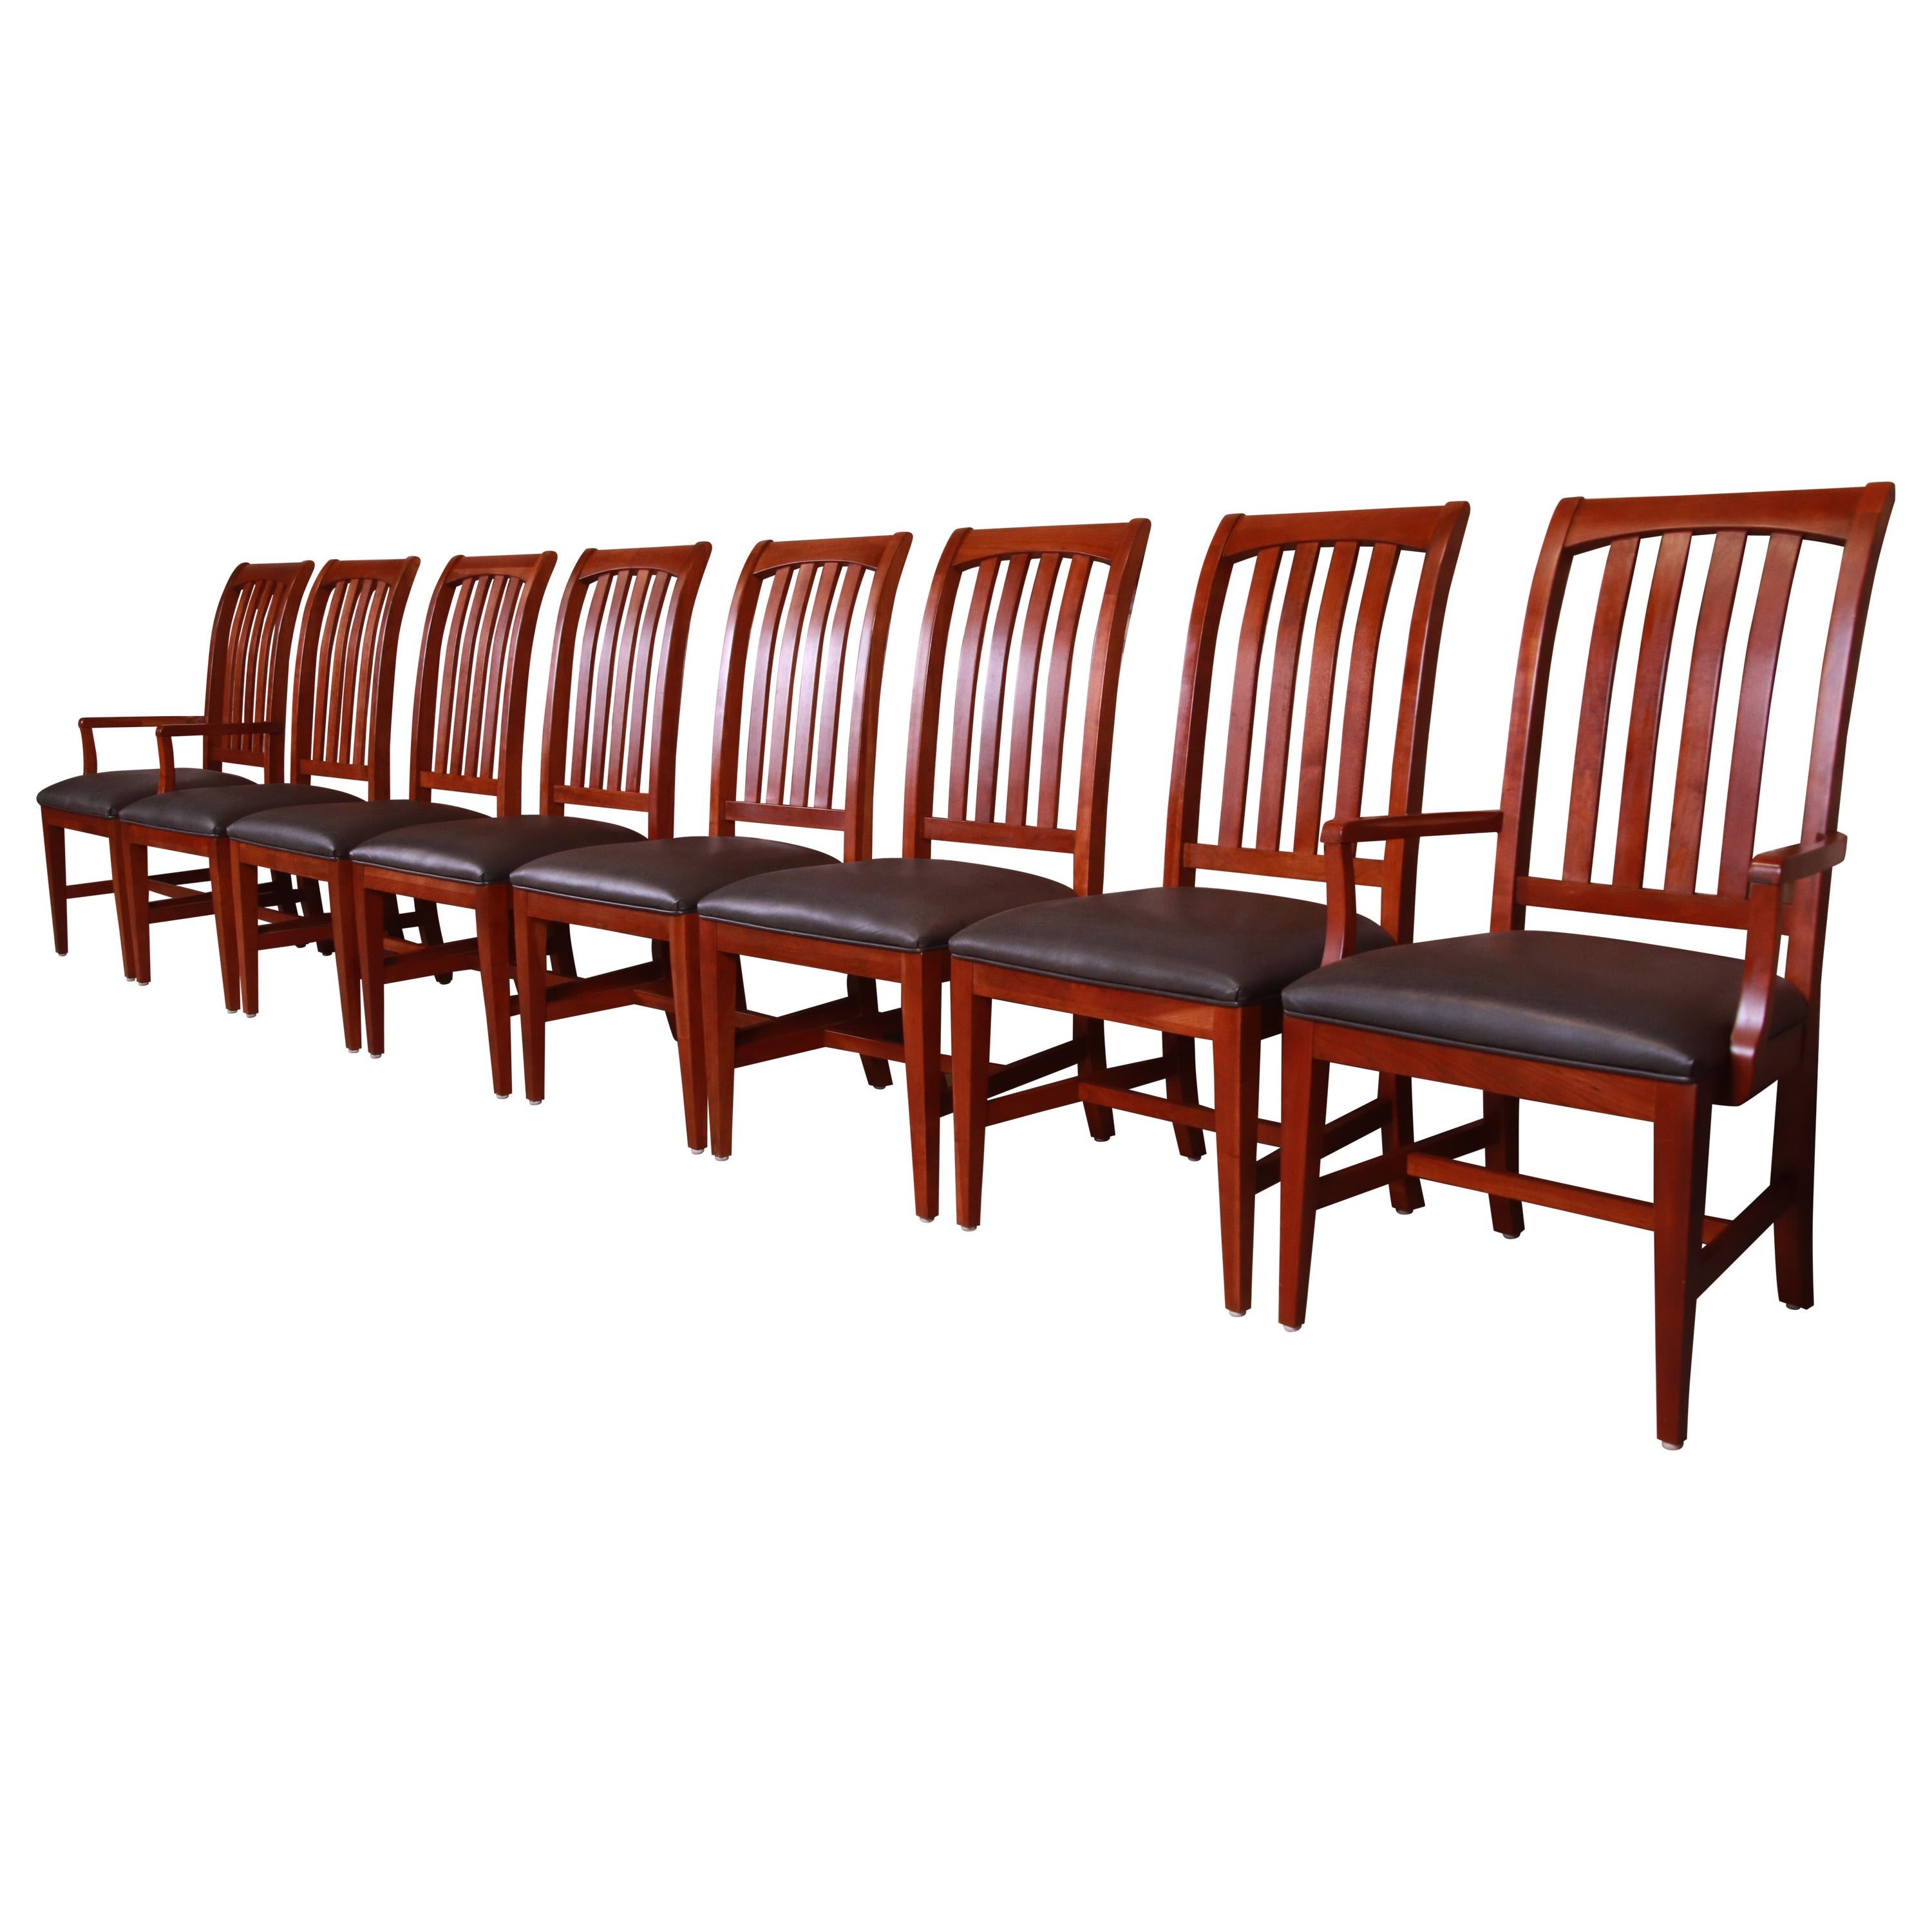 Ethan Allen Arts & Crafts Solid Cherry Wood Dining Chairs, Set of Eight